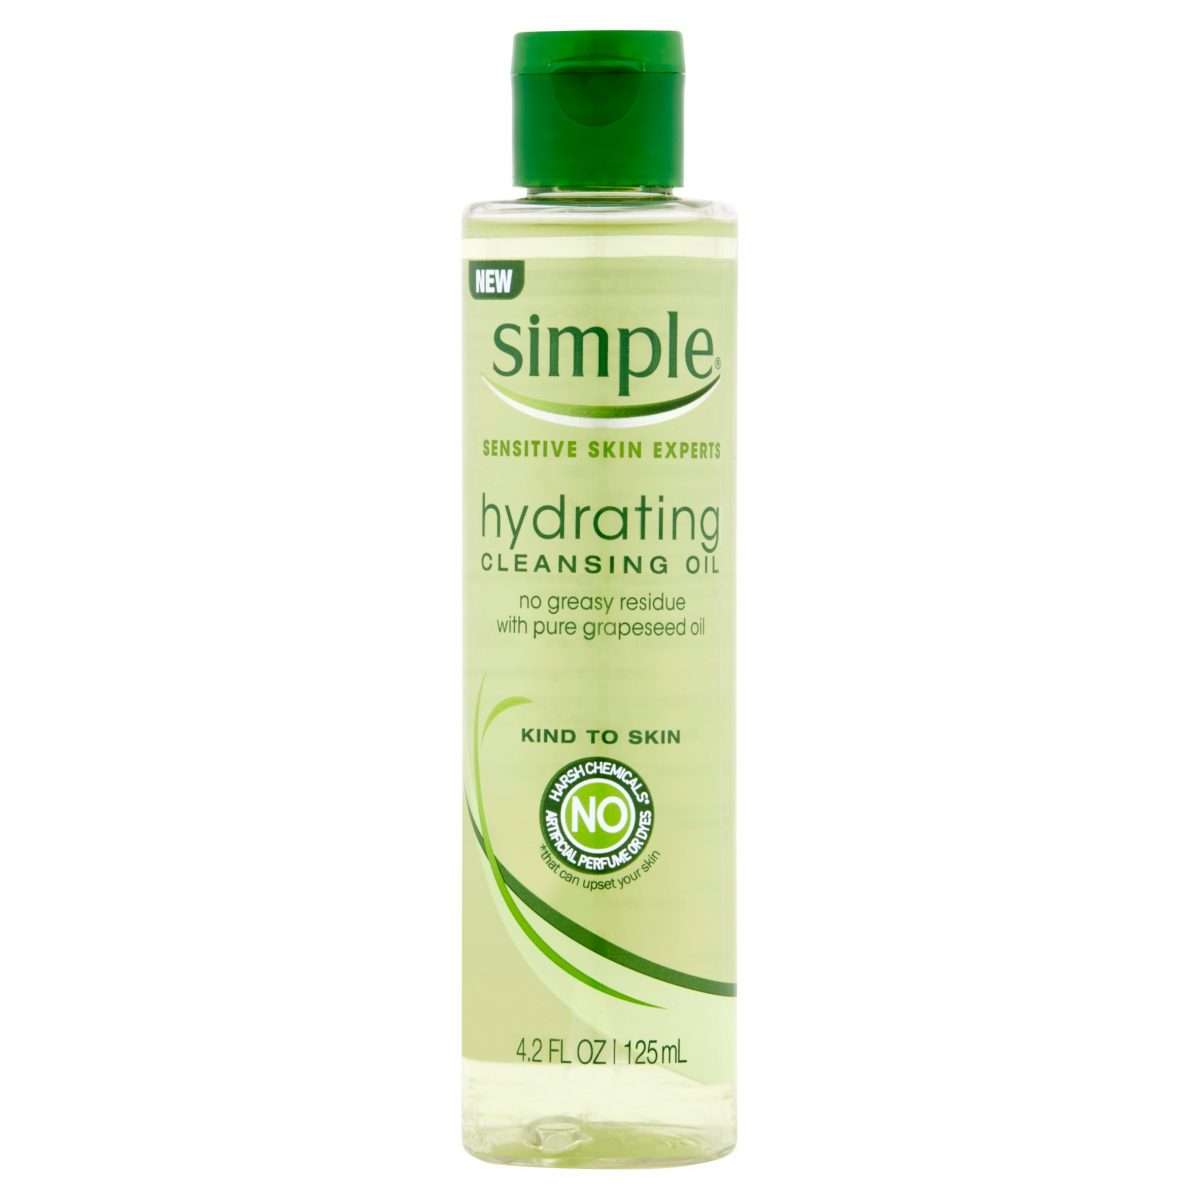 Simple Sensitive Skin Experts Hydrating Cleansing Oil, 4.2 Fl Oz ...